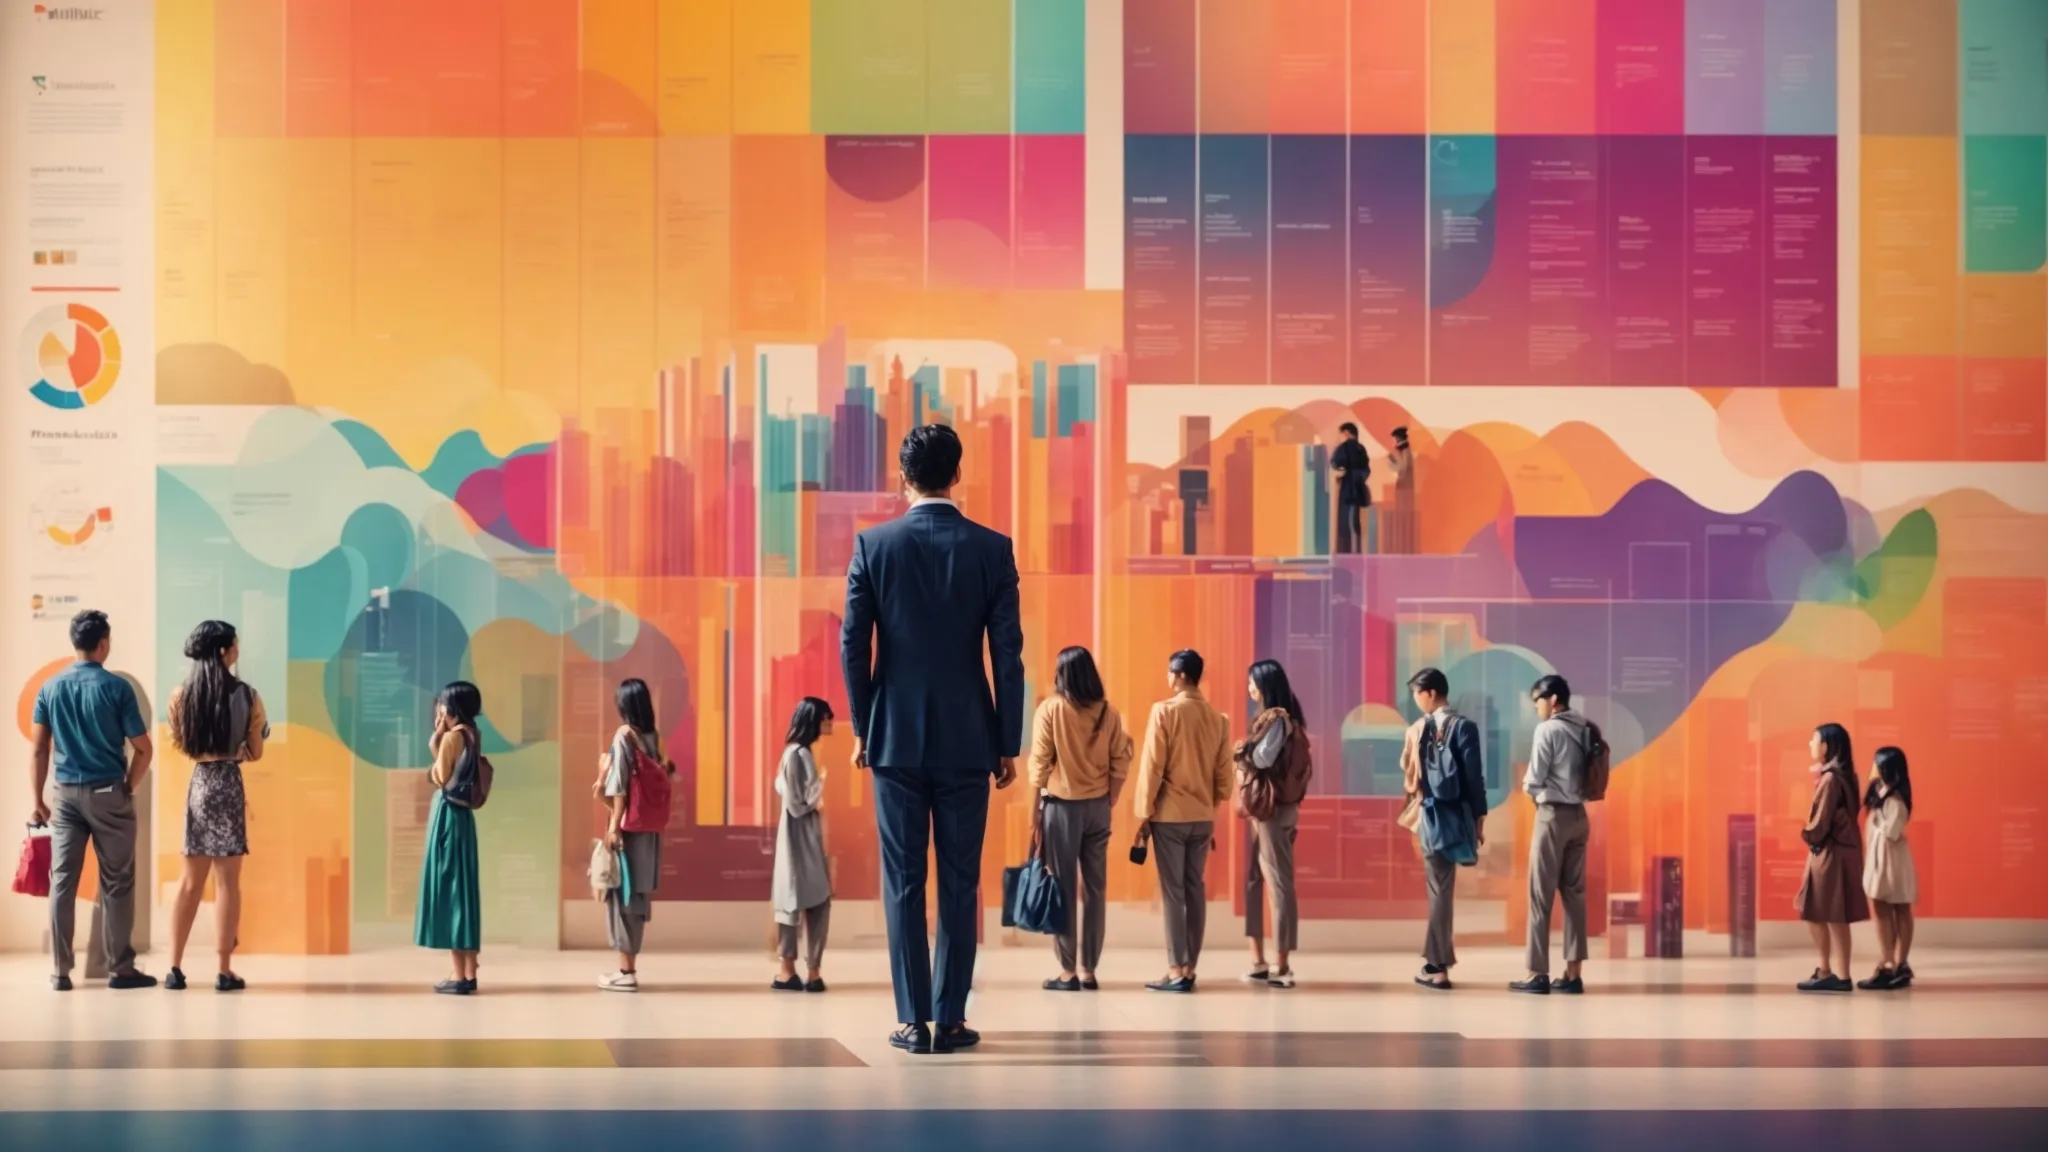 a marketer stands before a large, colorful infographic illustrating diverse groups of people to highlight their varying interests and needs.